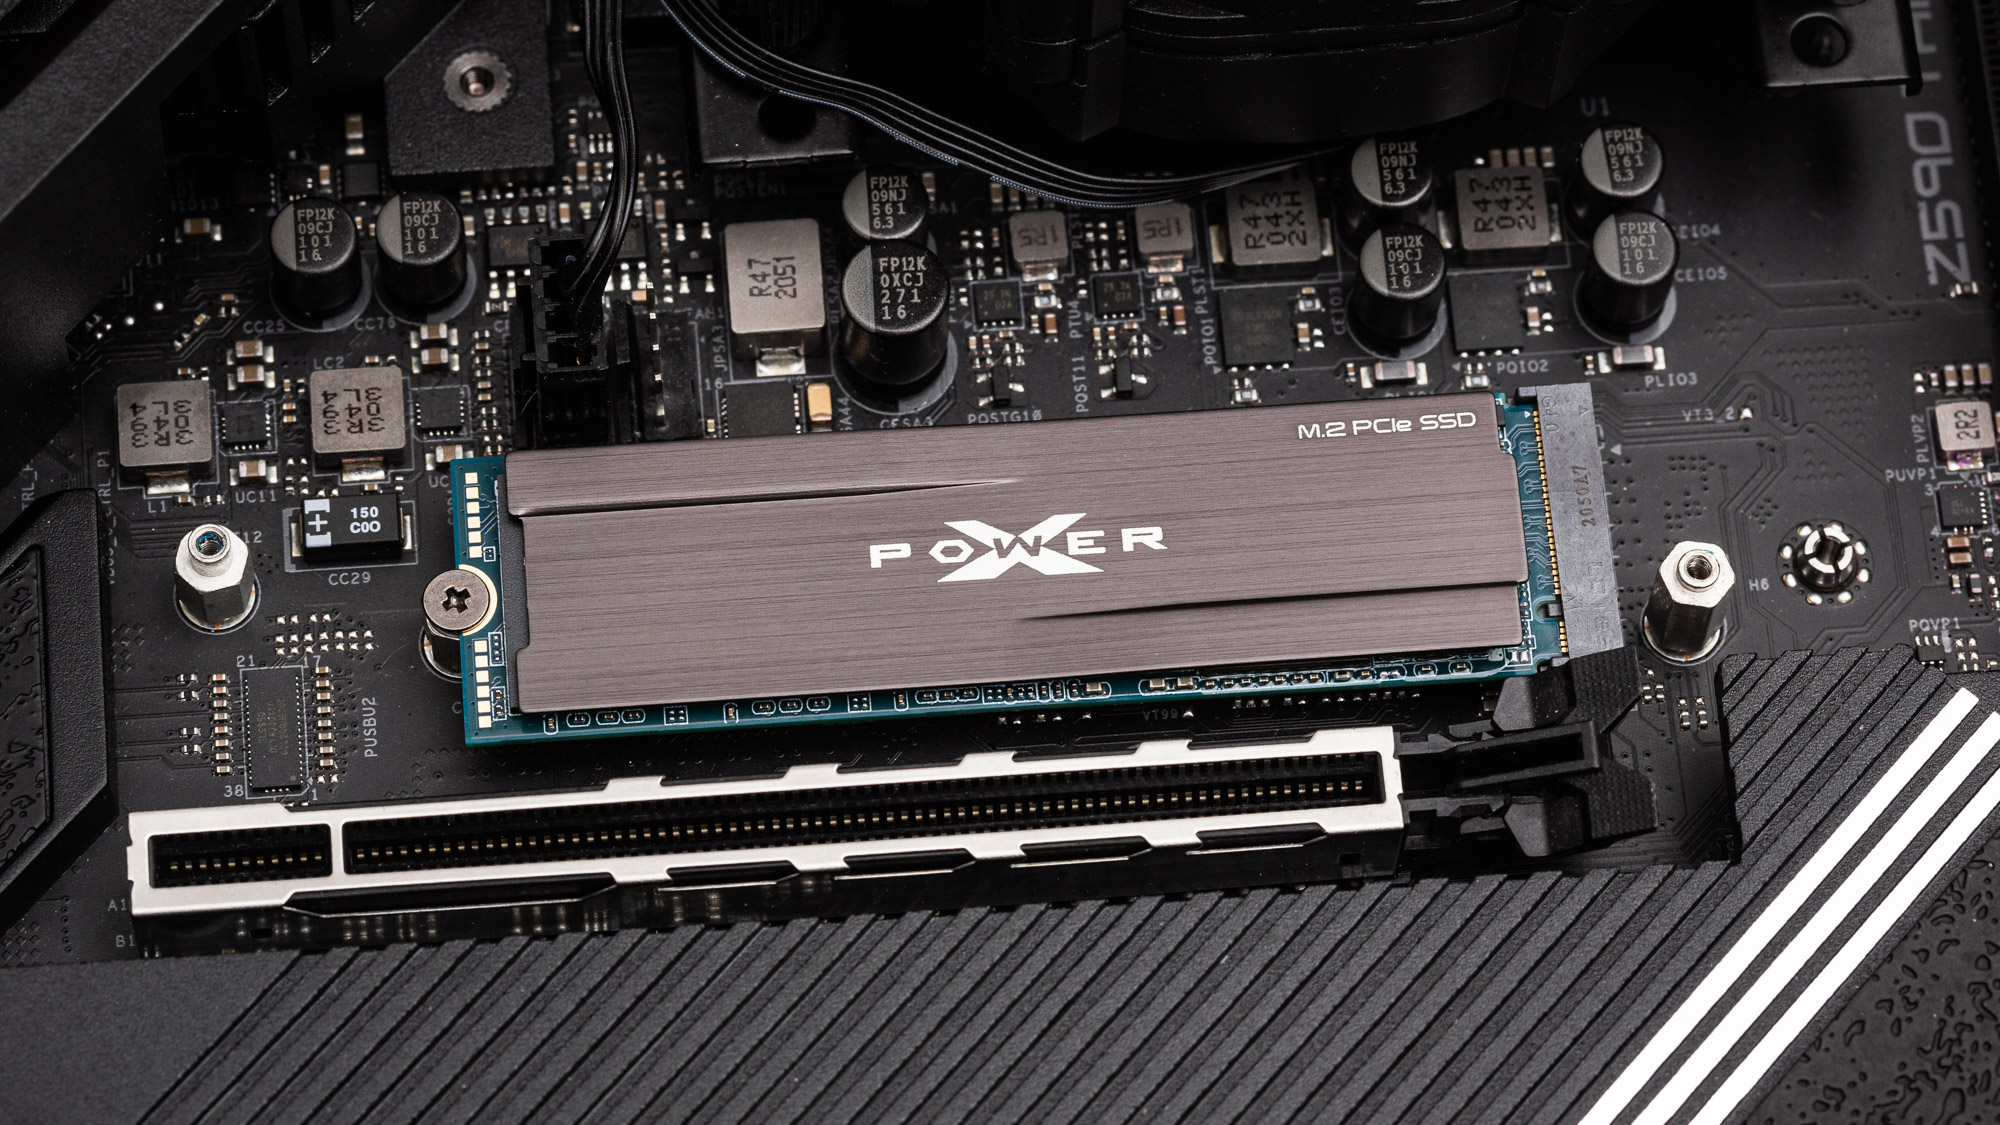 Silicon Power XD80 SSD Review: Mainstream Performance at Low Cost